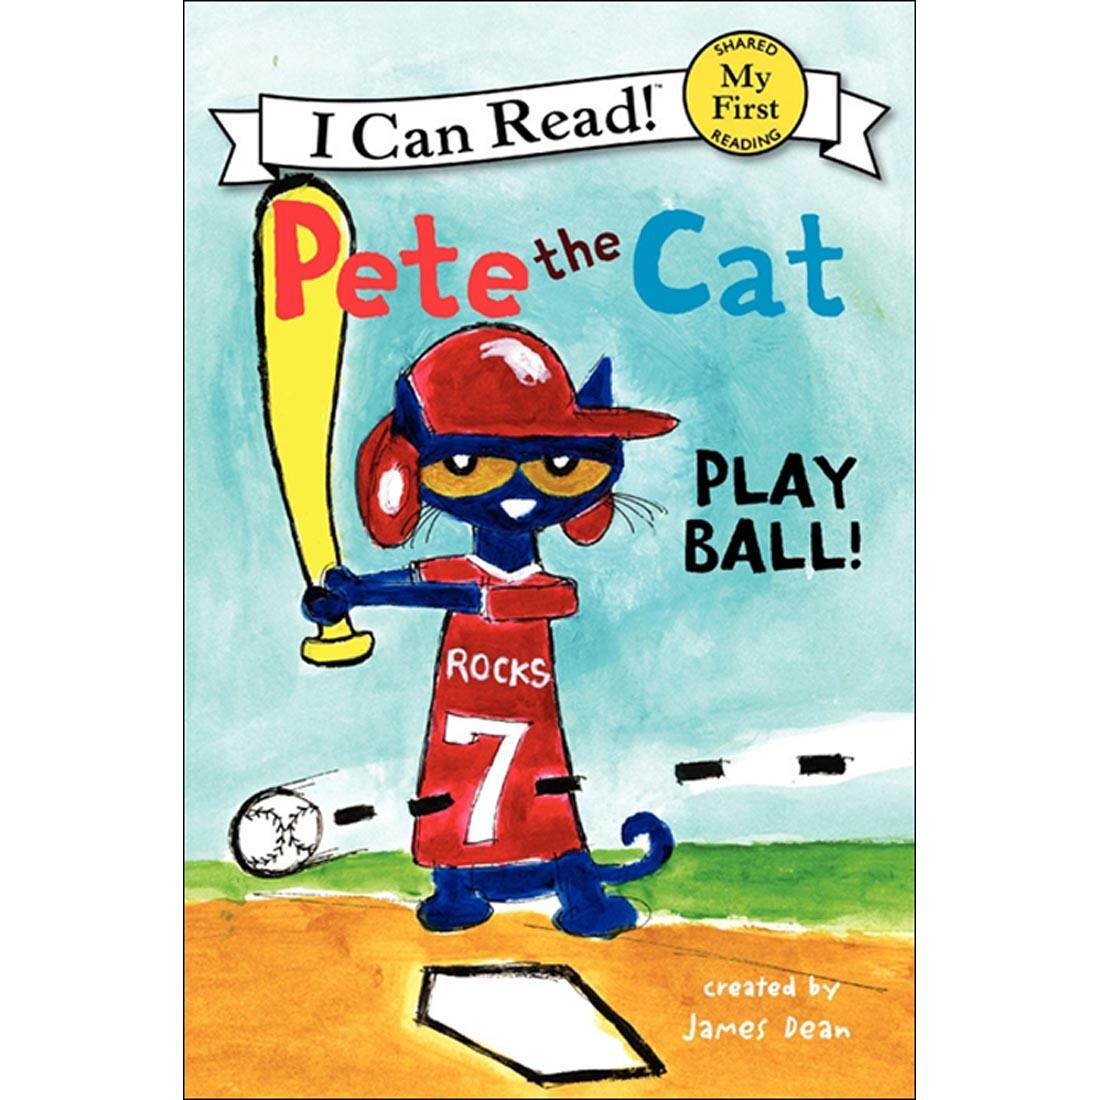 Pete The Cat: Play Ball! - A My First I Can Read Book, Shared Reading